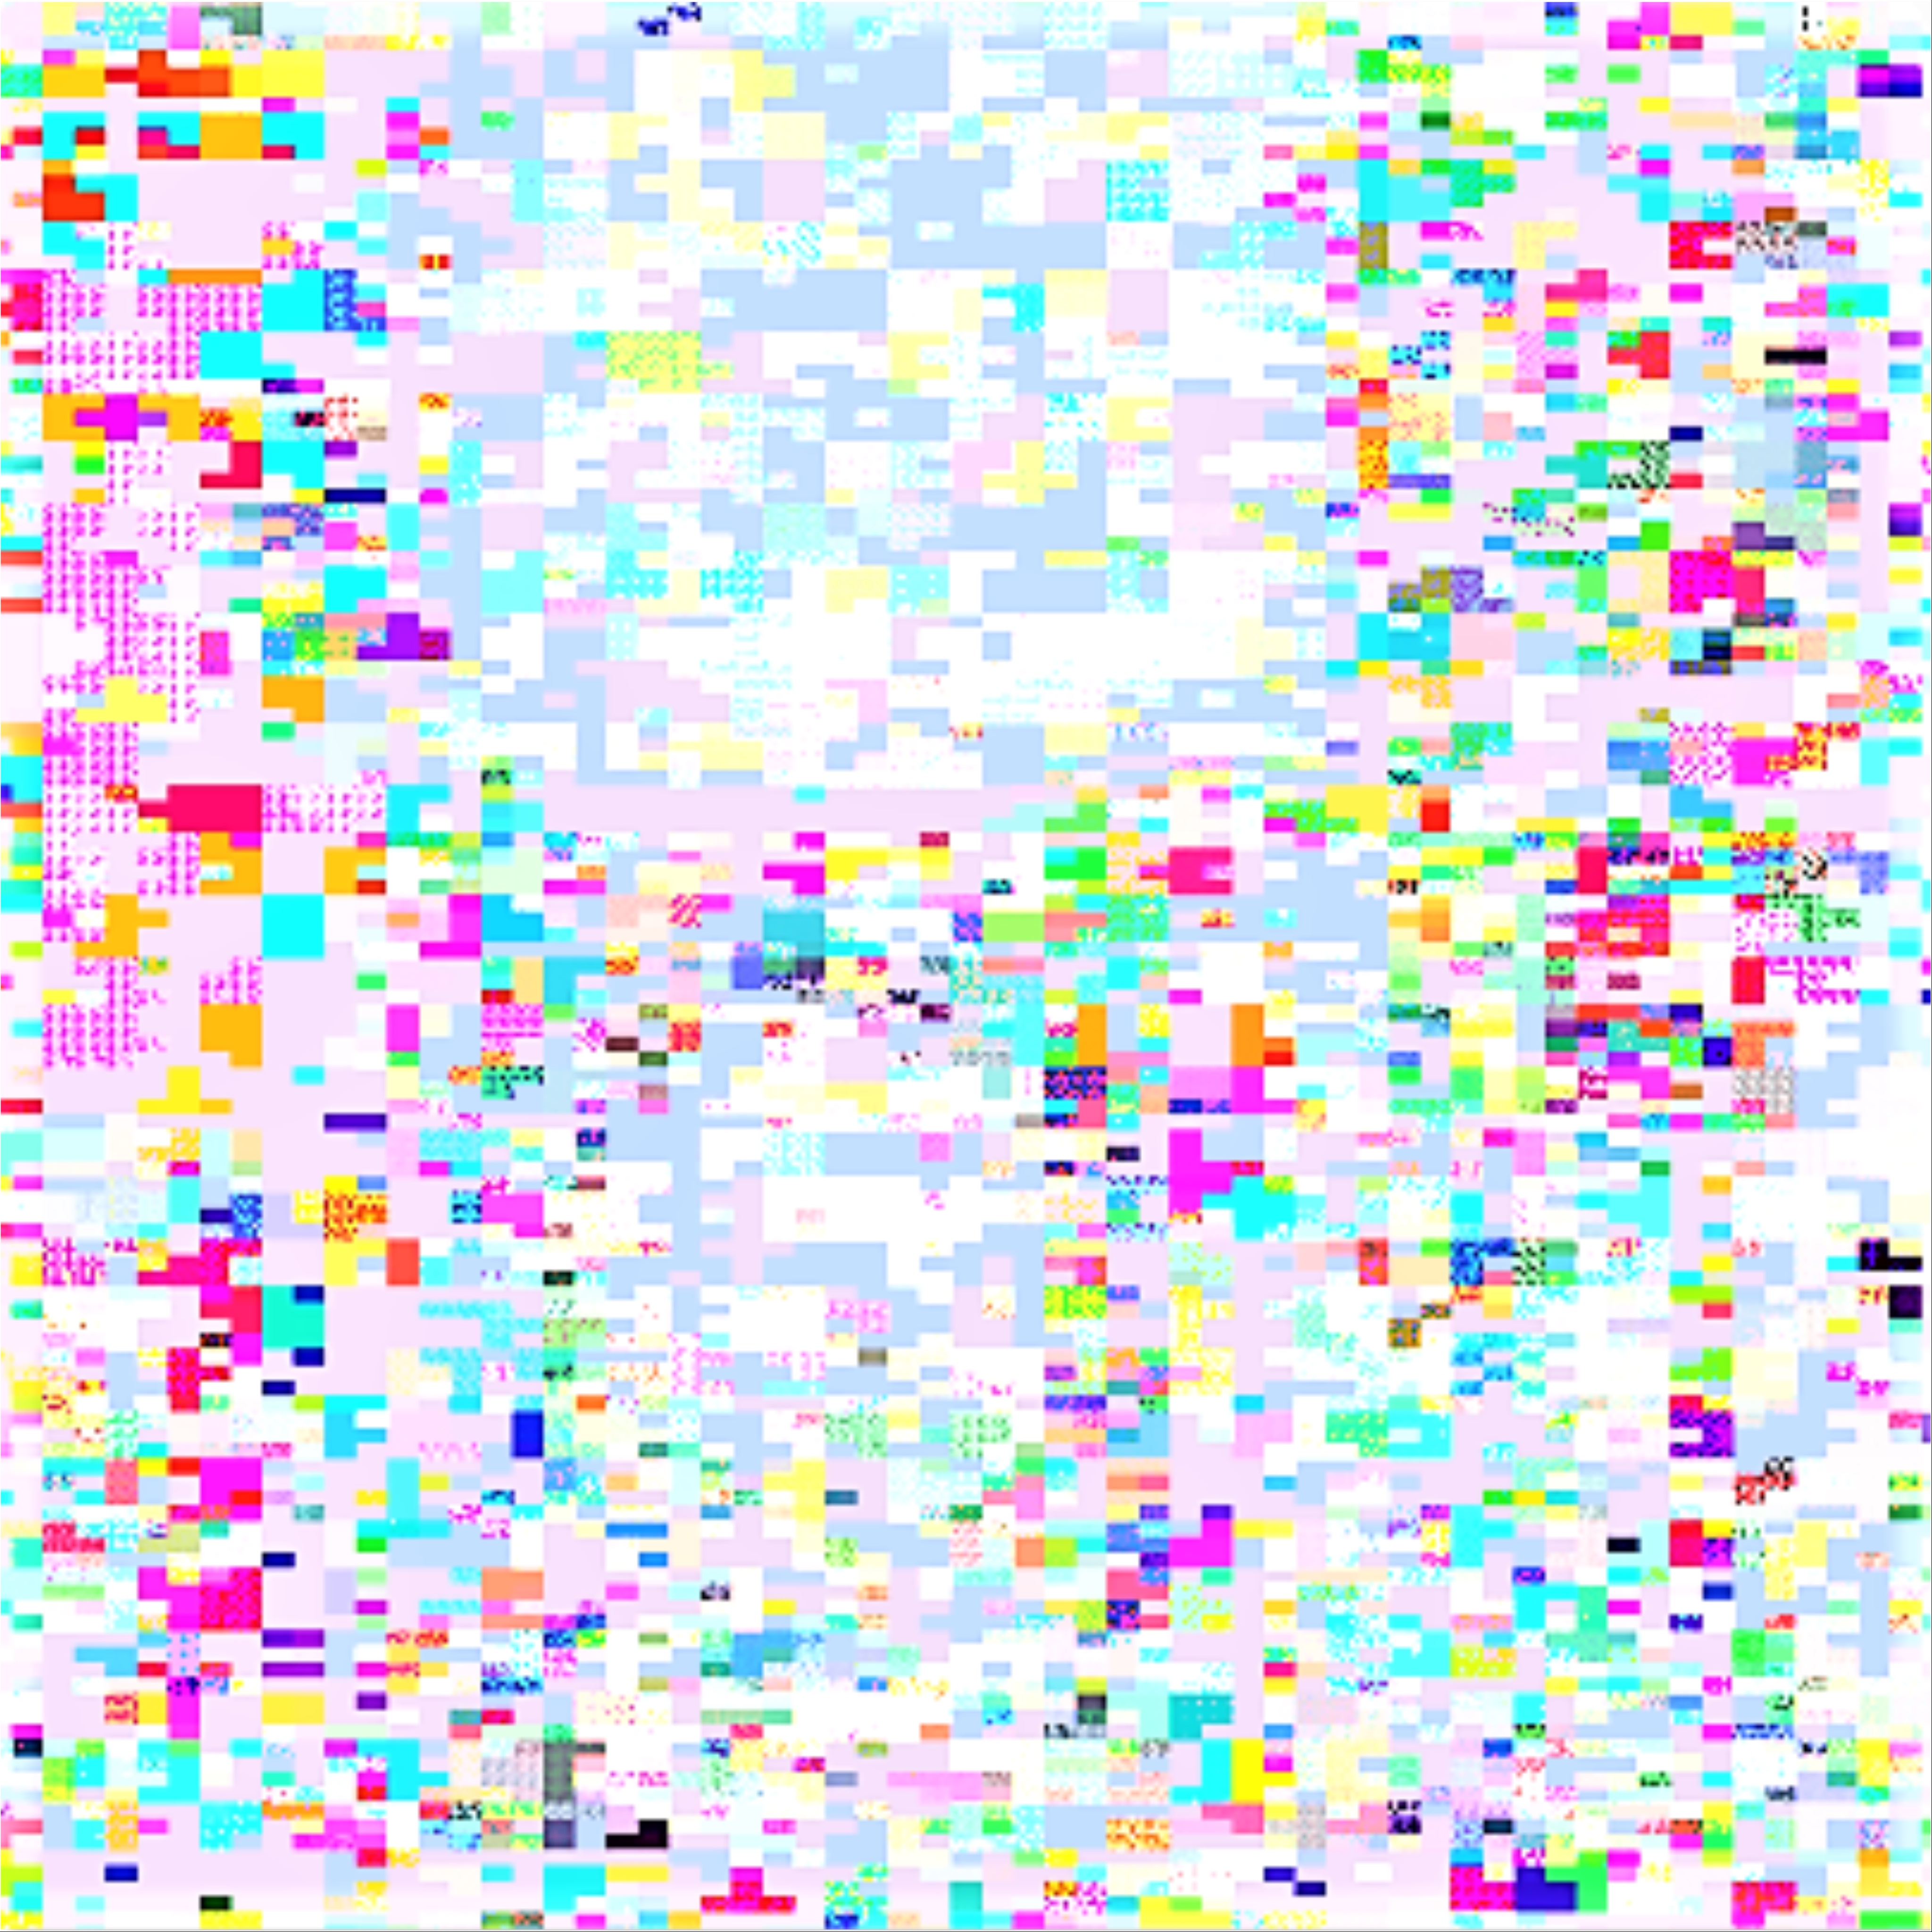 Operational Glitch Abstraction I